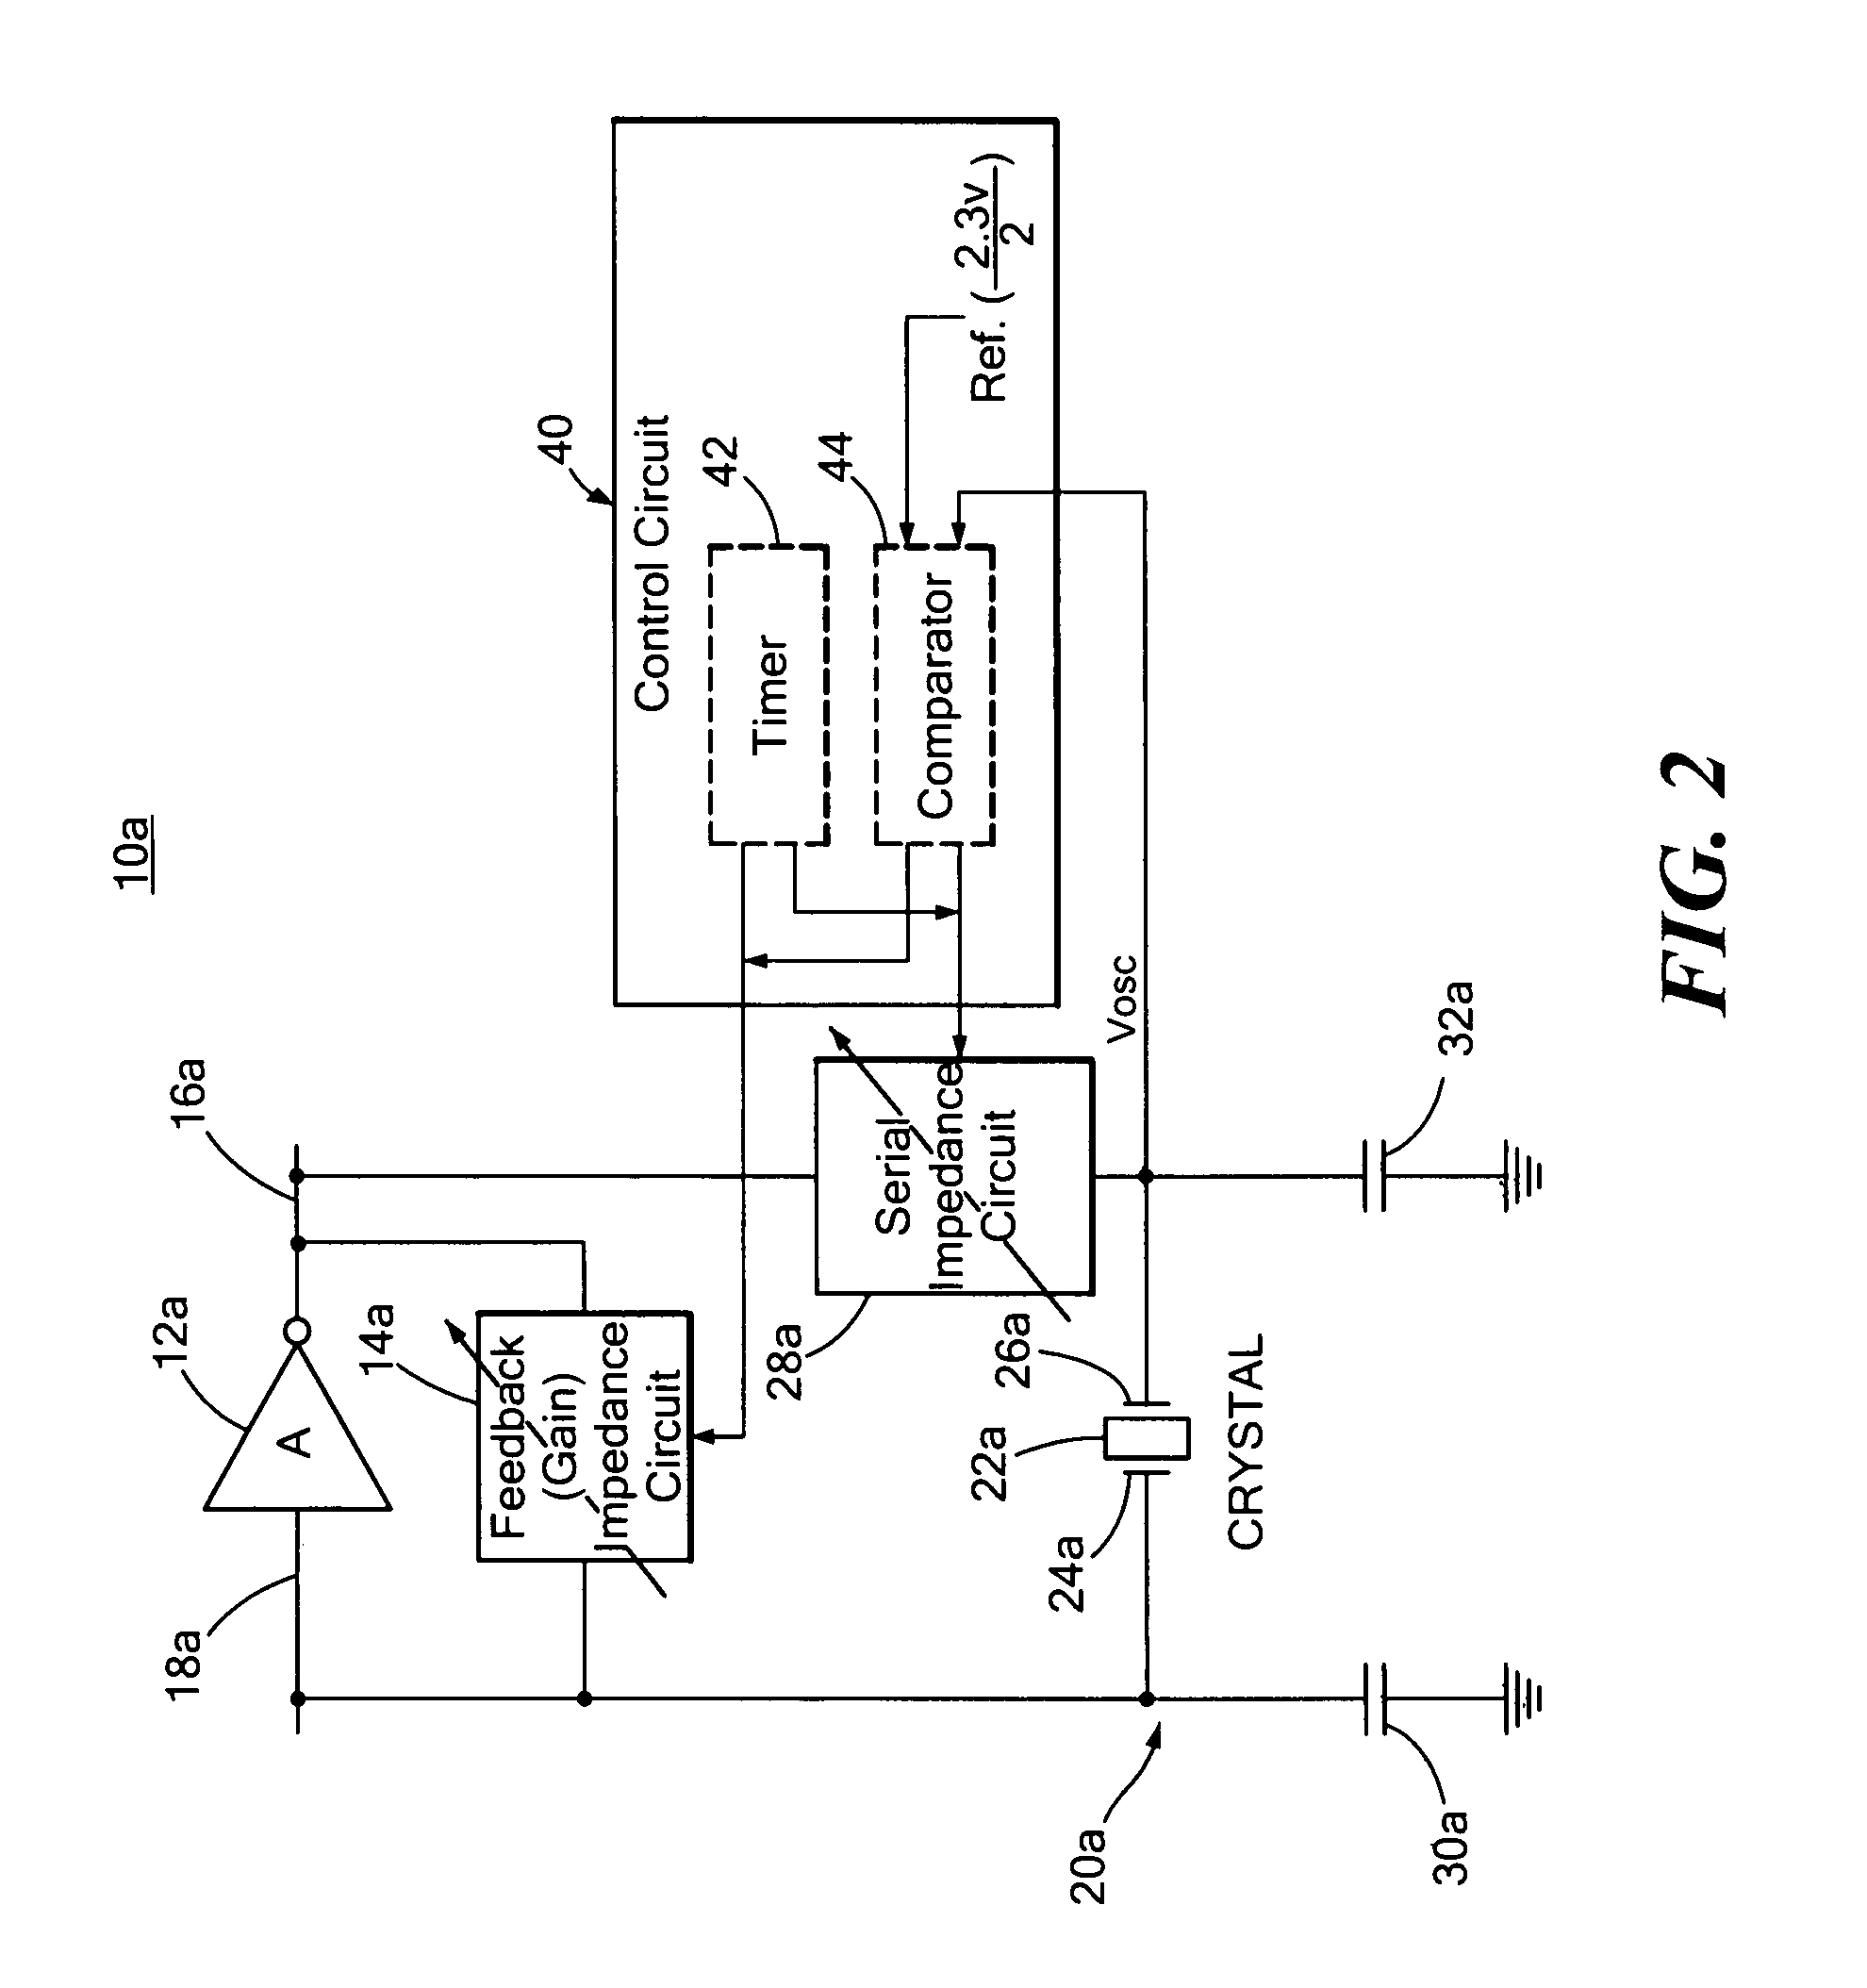 Crystal oscillator with variable-gain and variable-output-impedance inverter system